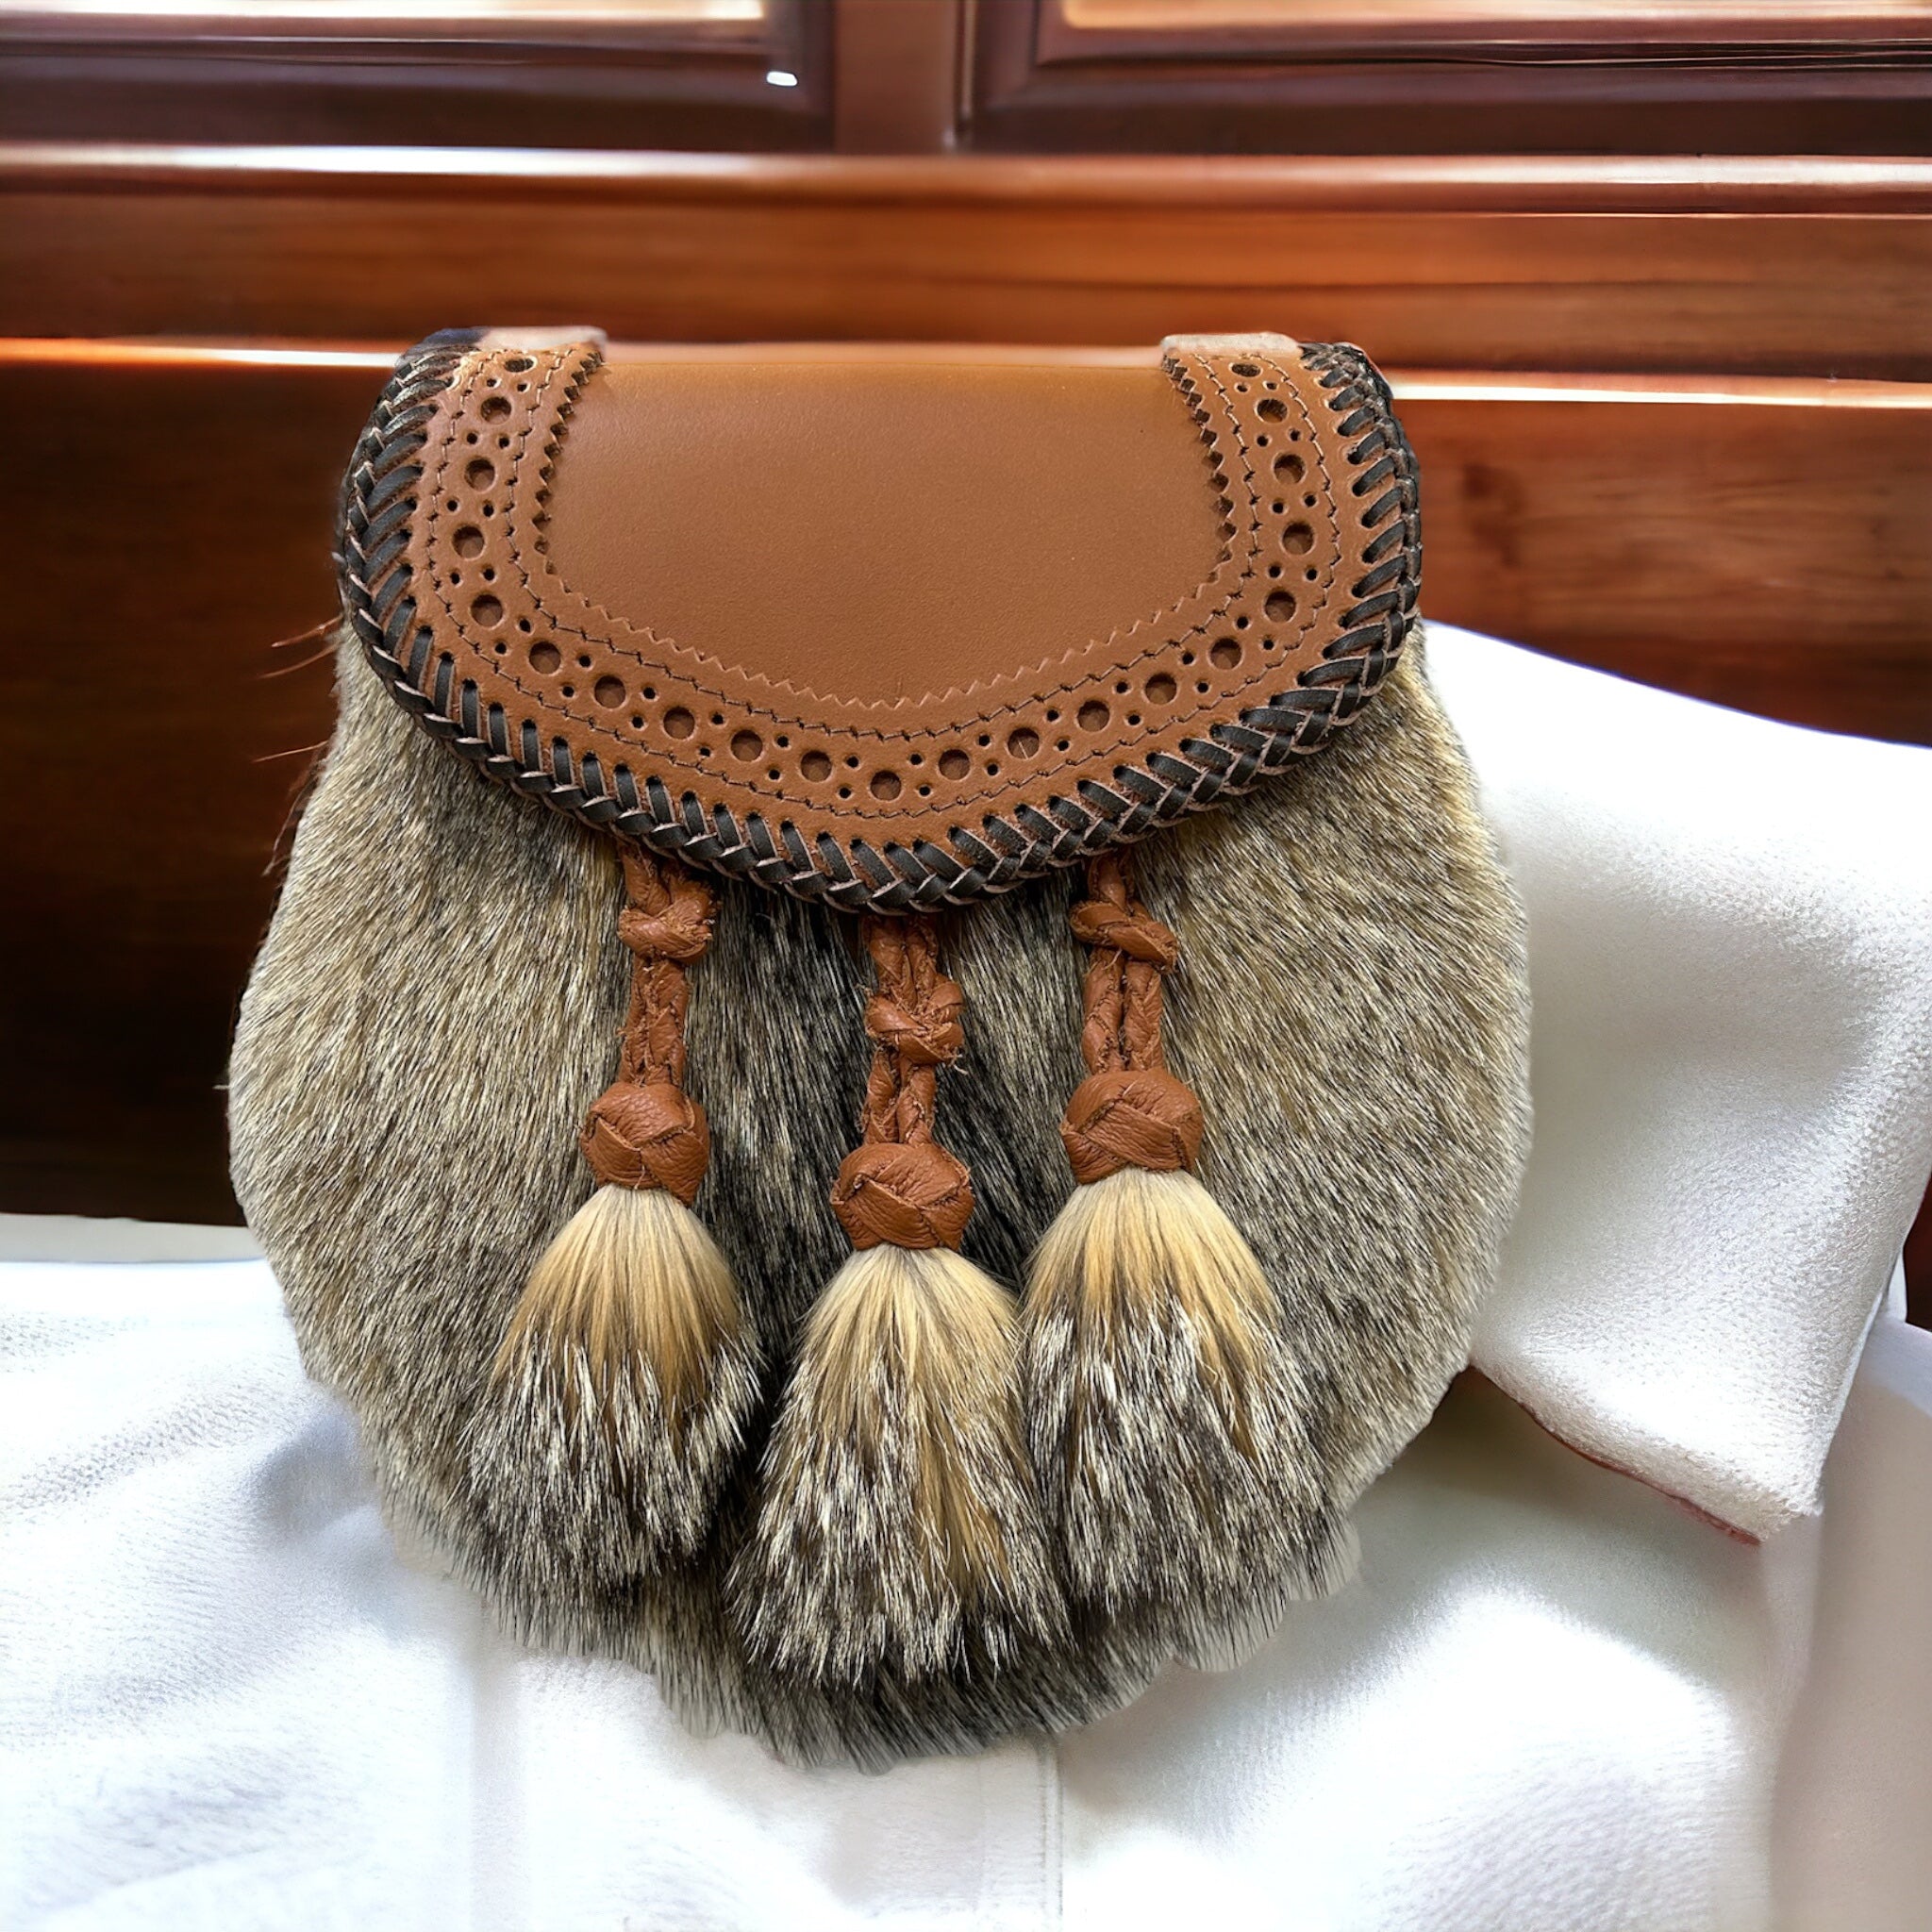 Artisan Classic sporran with braided leather lid, fur body and three fur and leather tassels